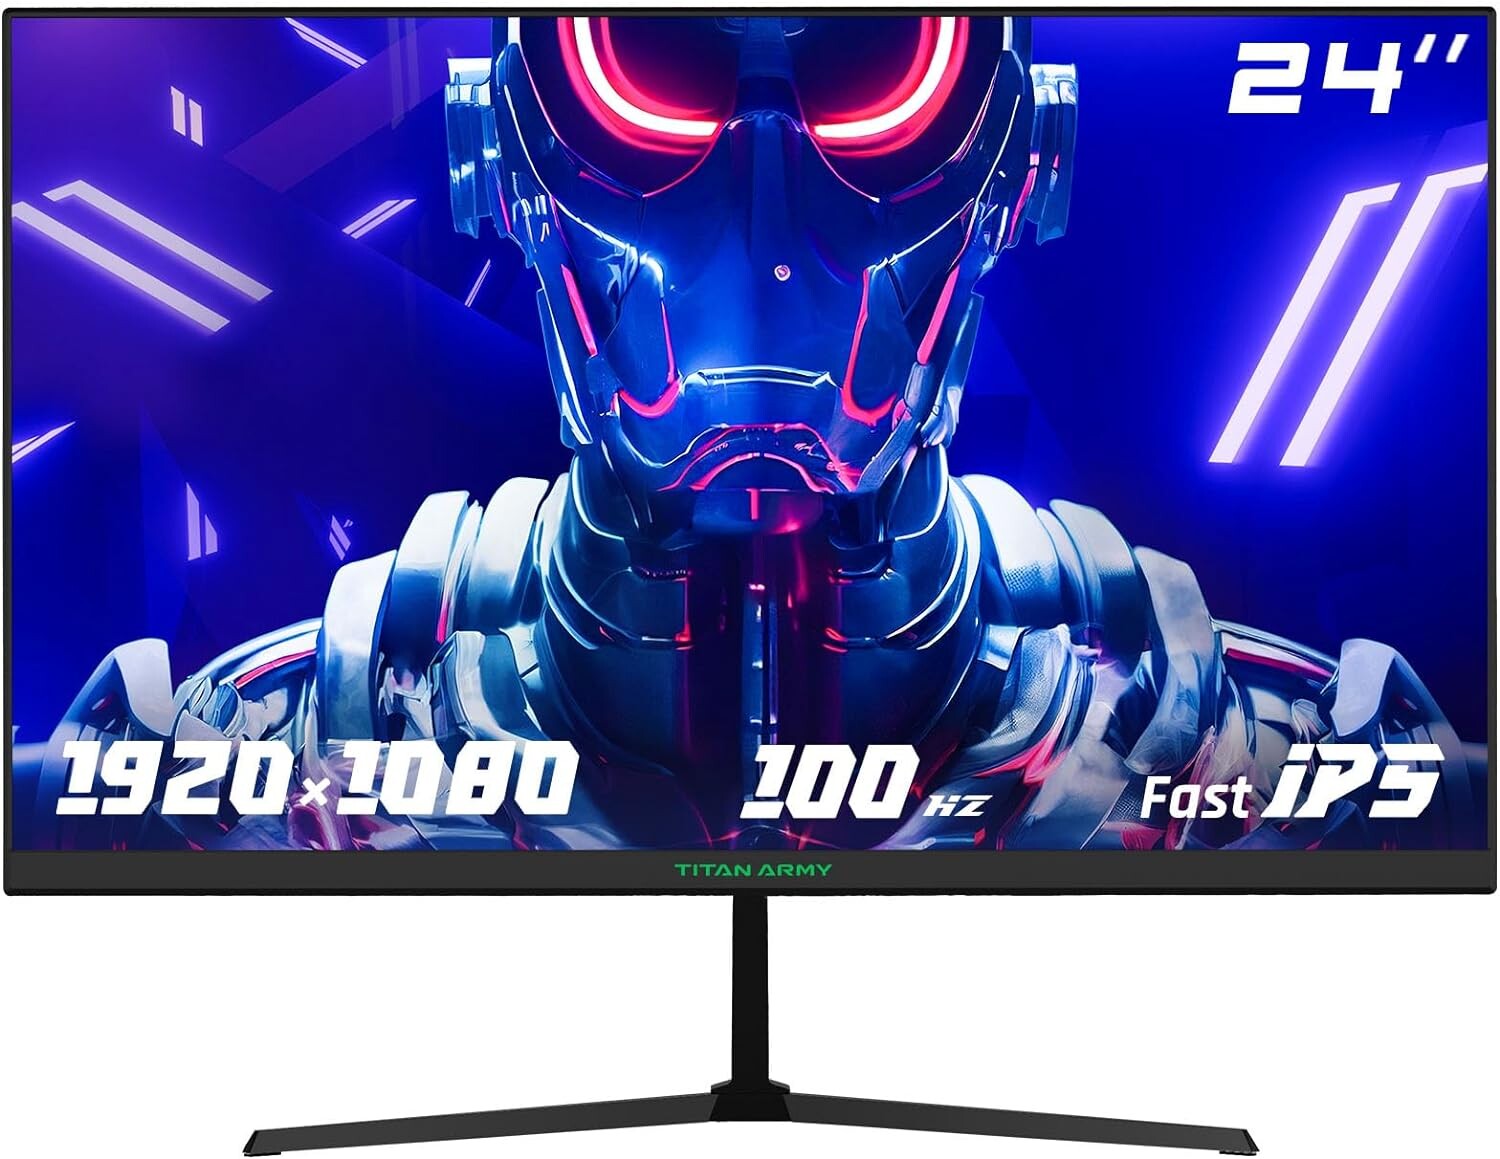 Titan Army Gaming Monitors Start Selling in the US